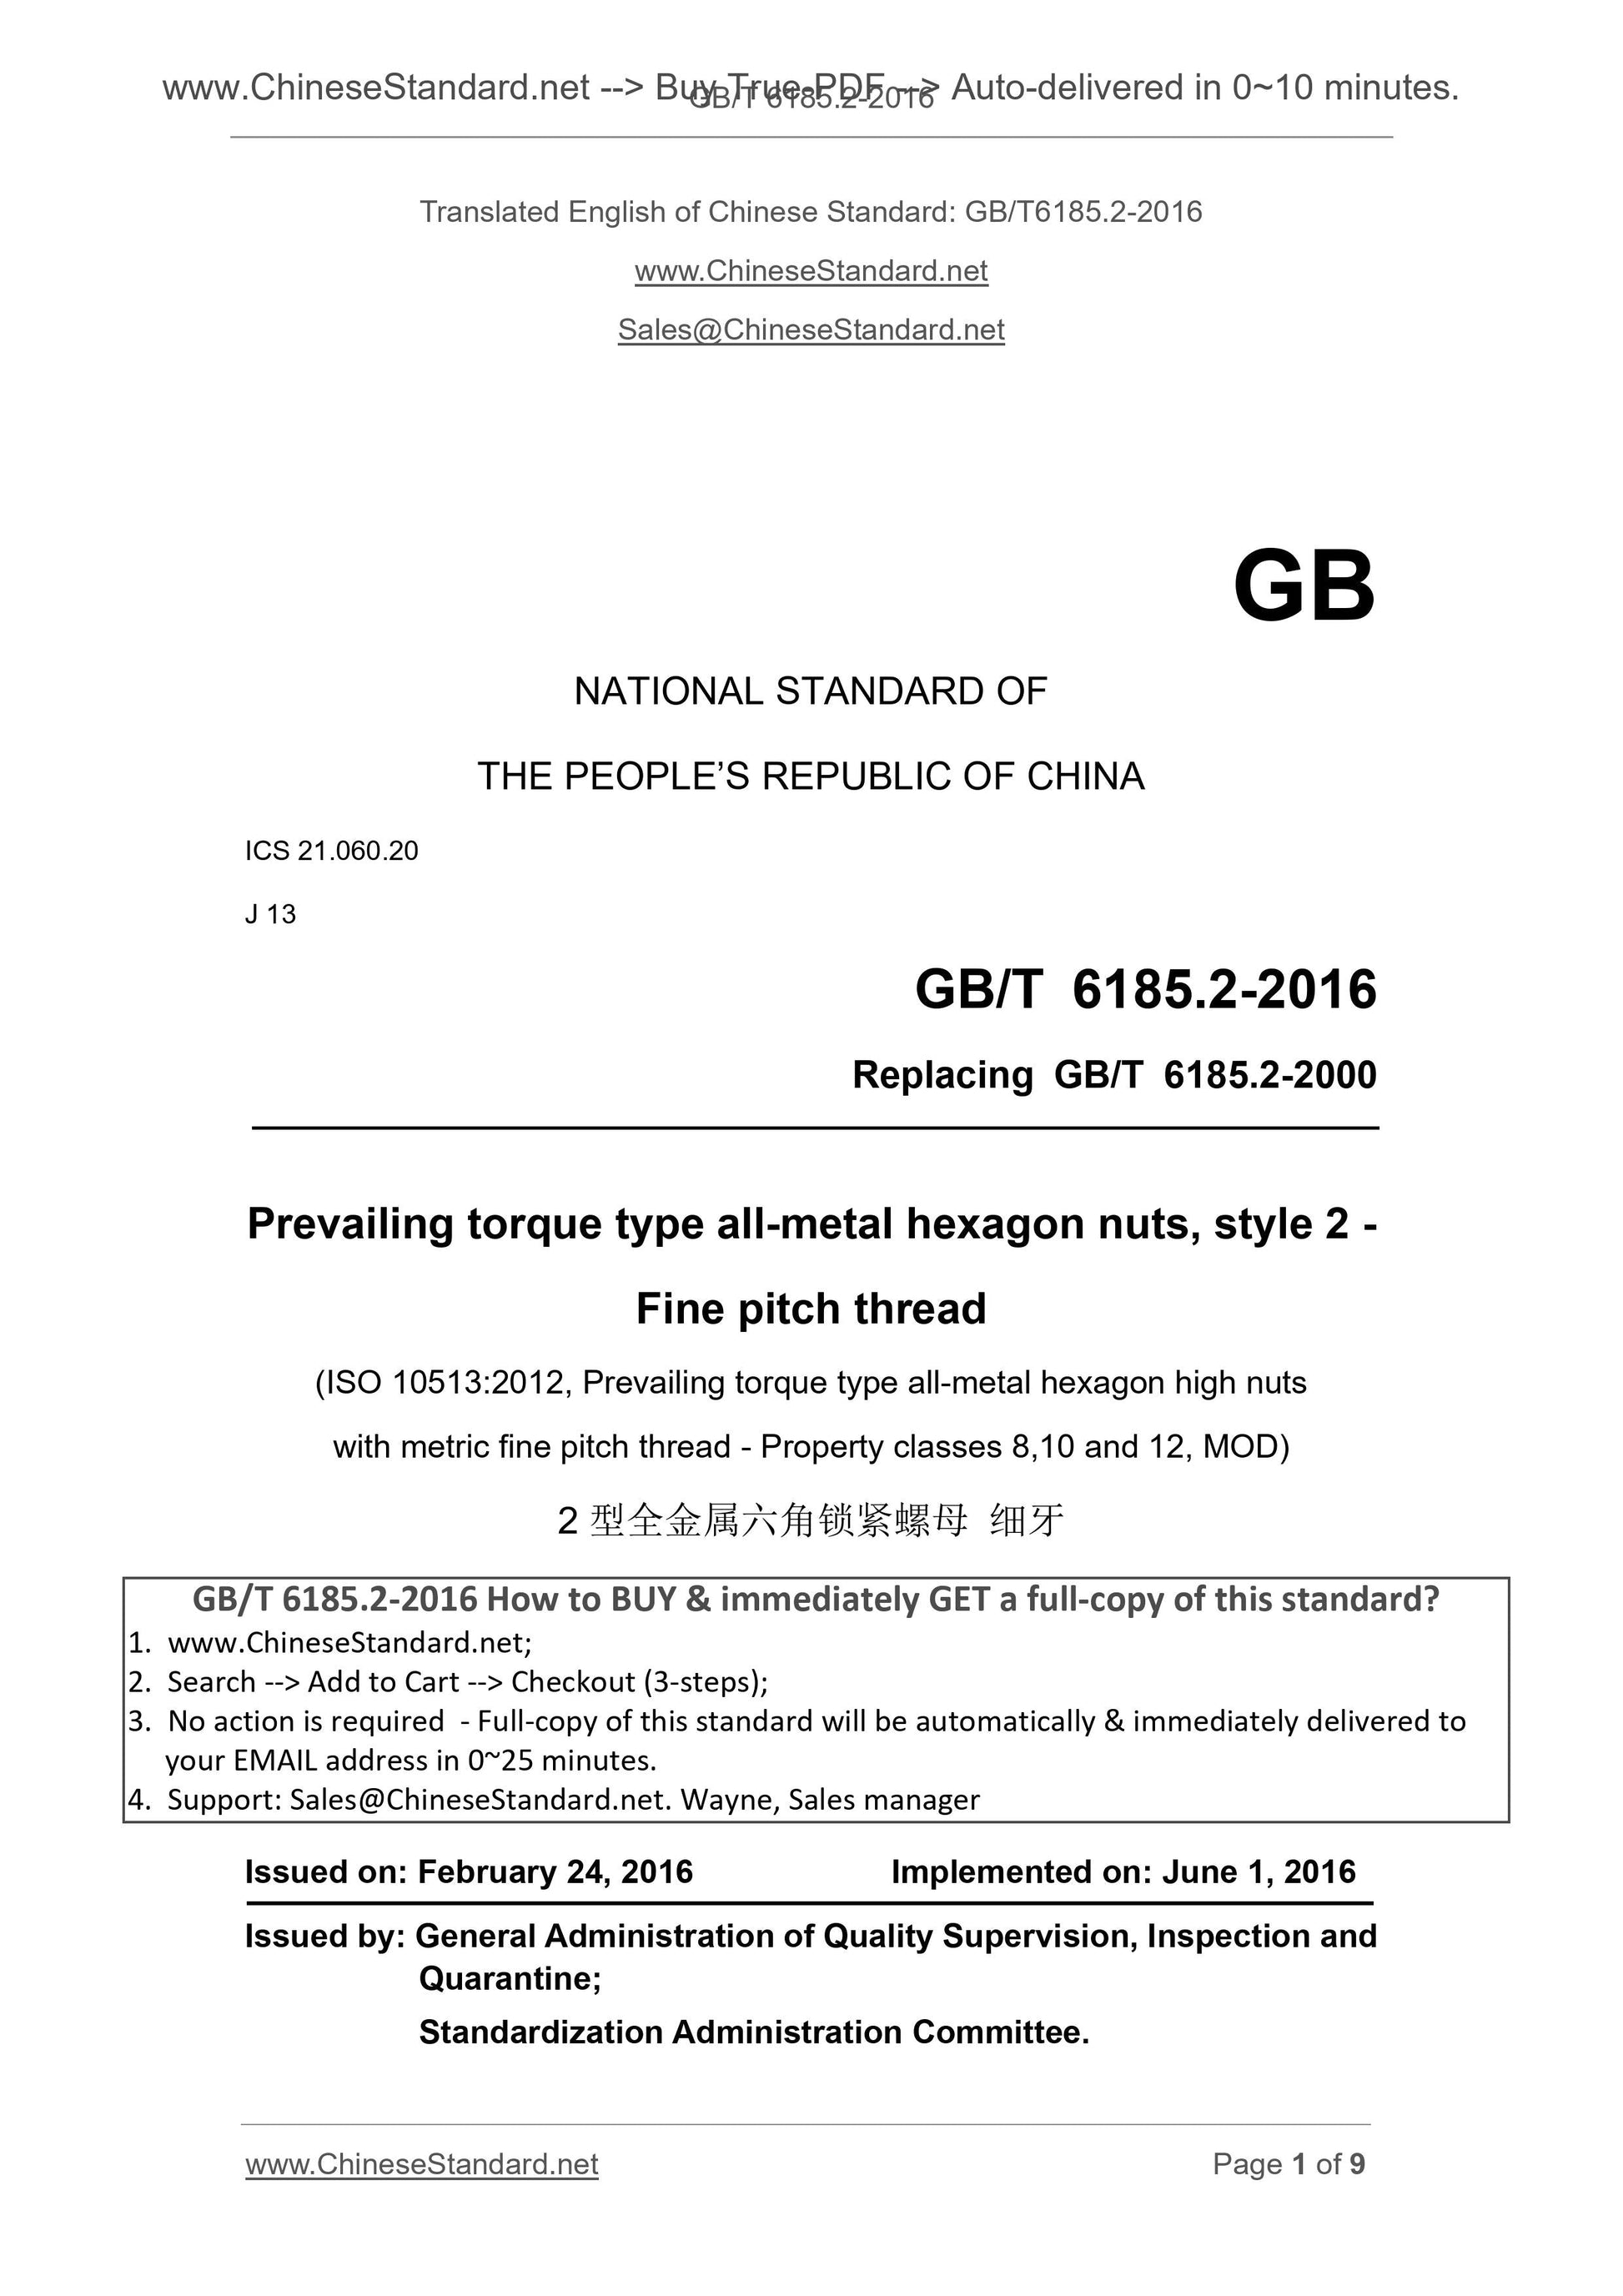 GB/T 6185.2-2016 Page 1